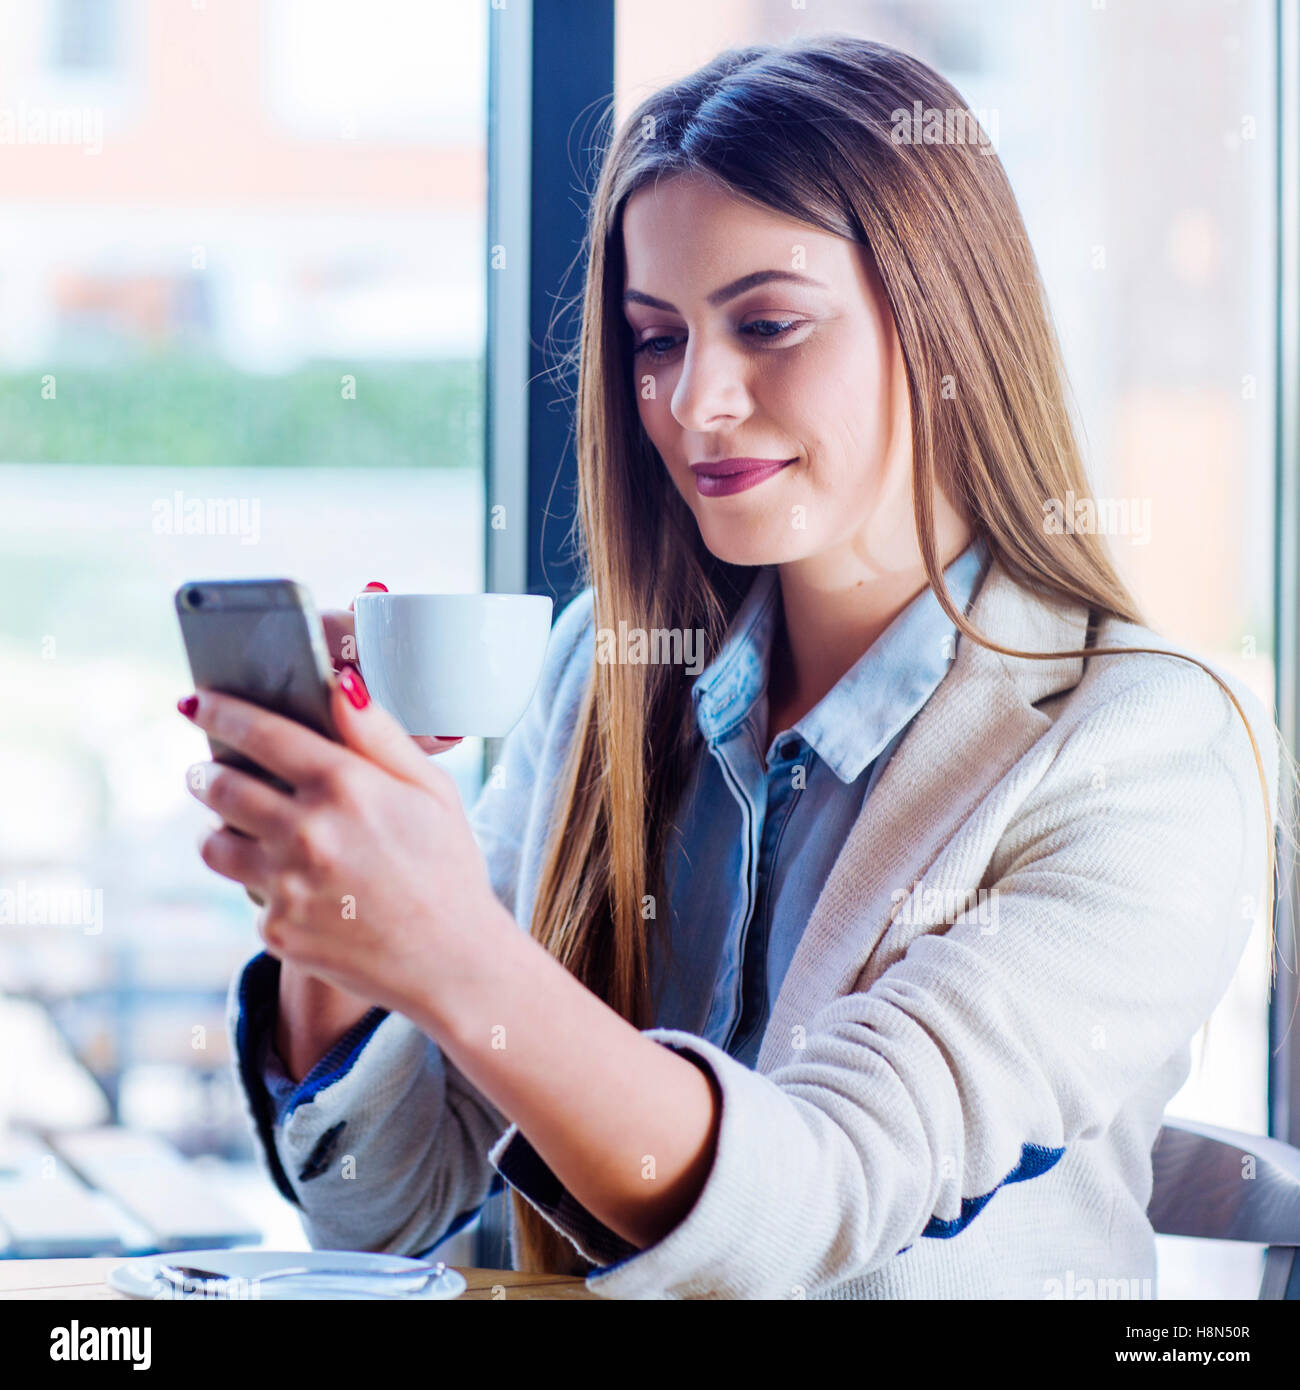 Beautiful Young Woman Drinking Coffee and Looking at her phone Stock Photo